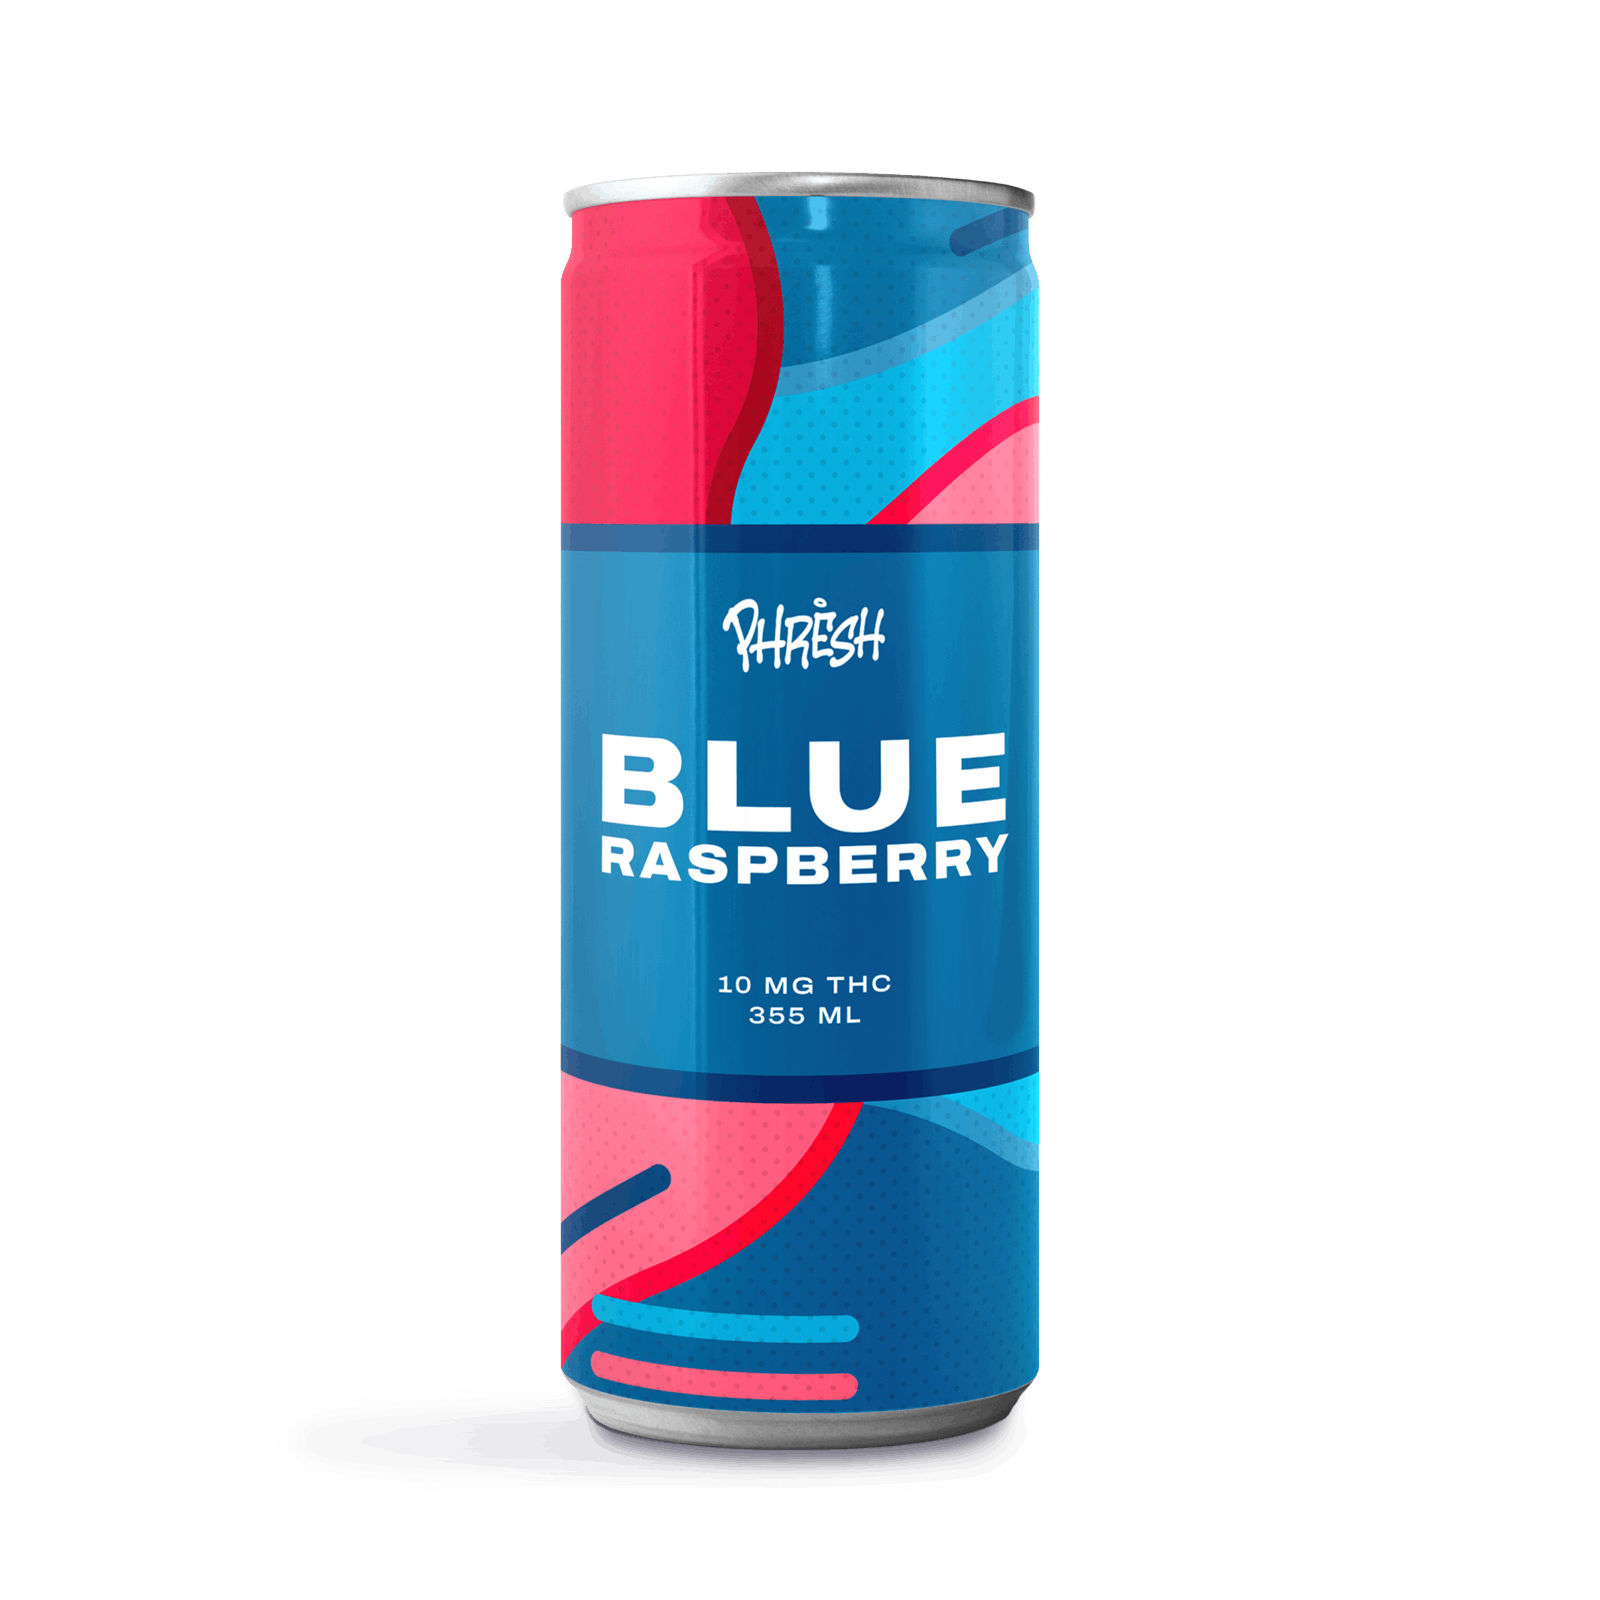 Resync Sparkling Functional Beverage - Wildberry Citrus - Resync